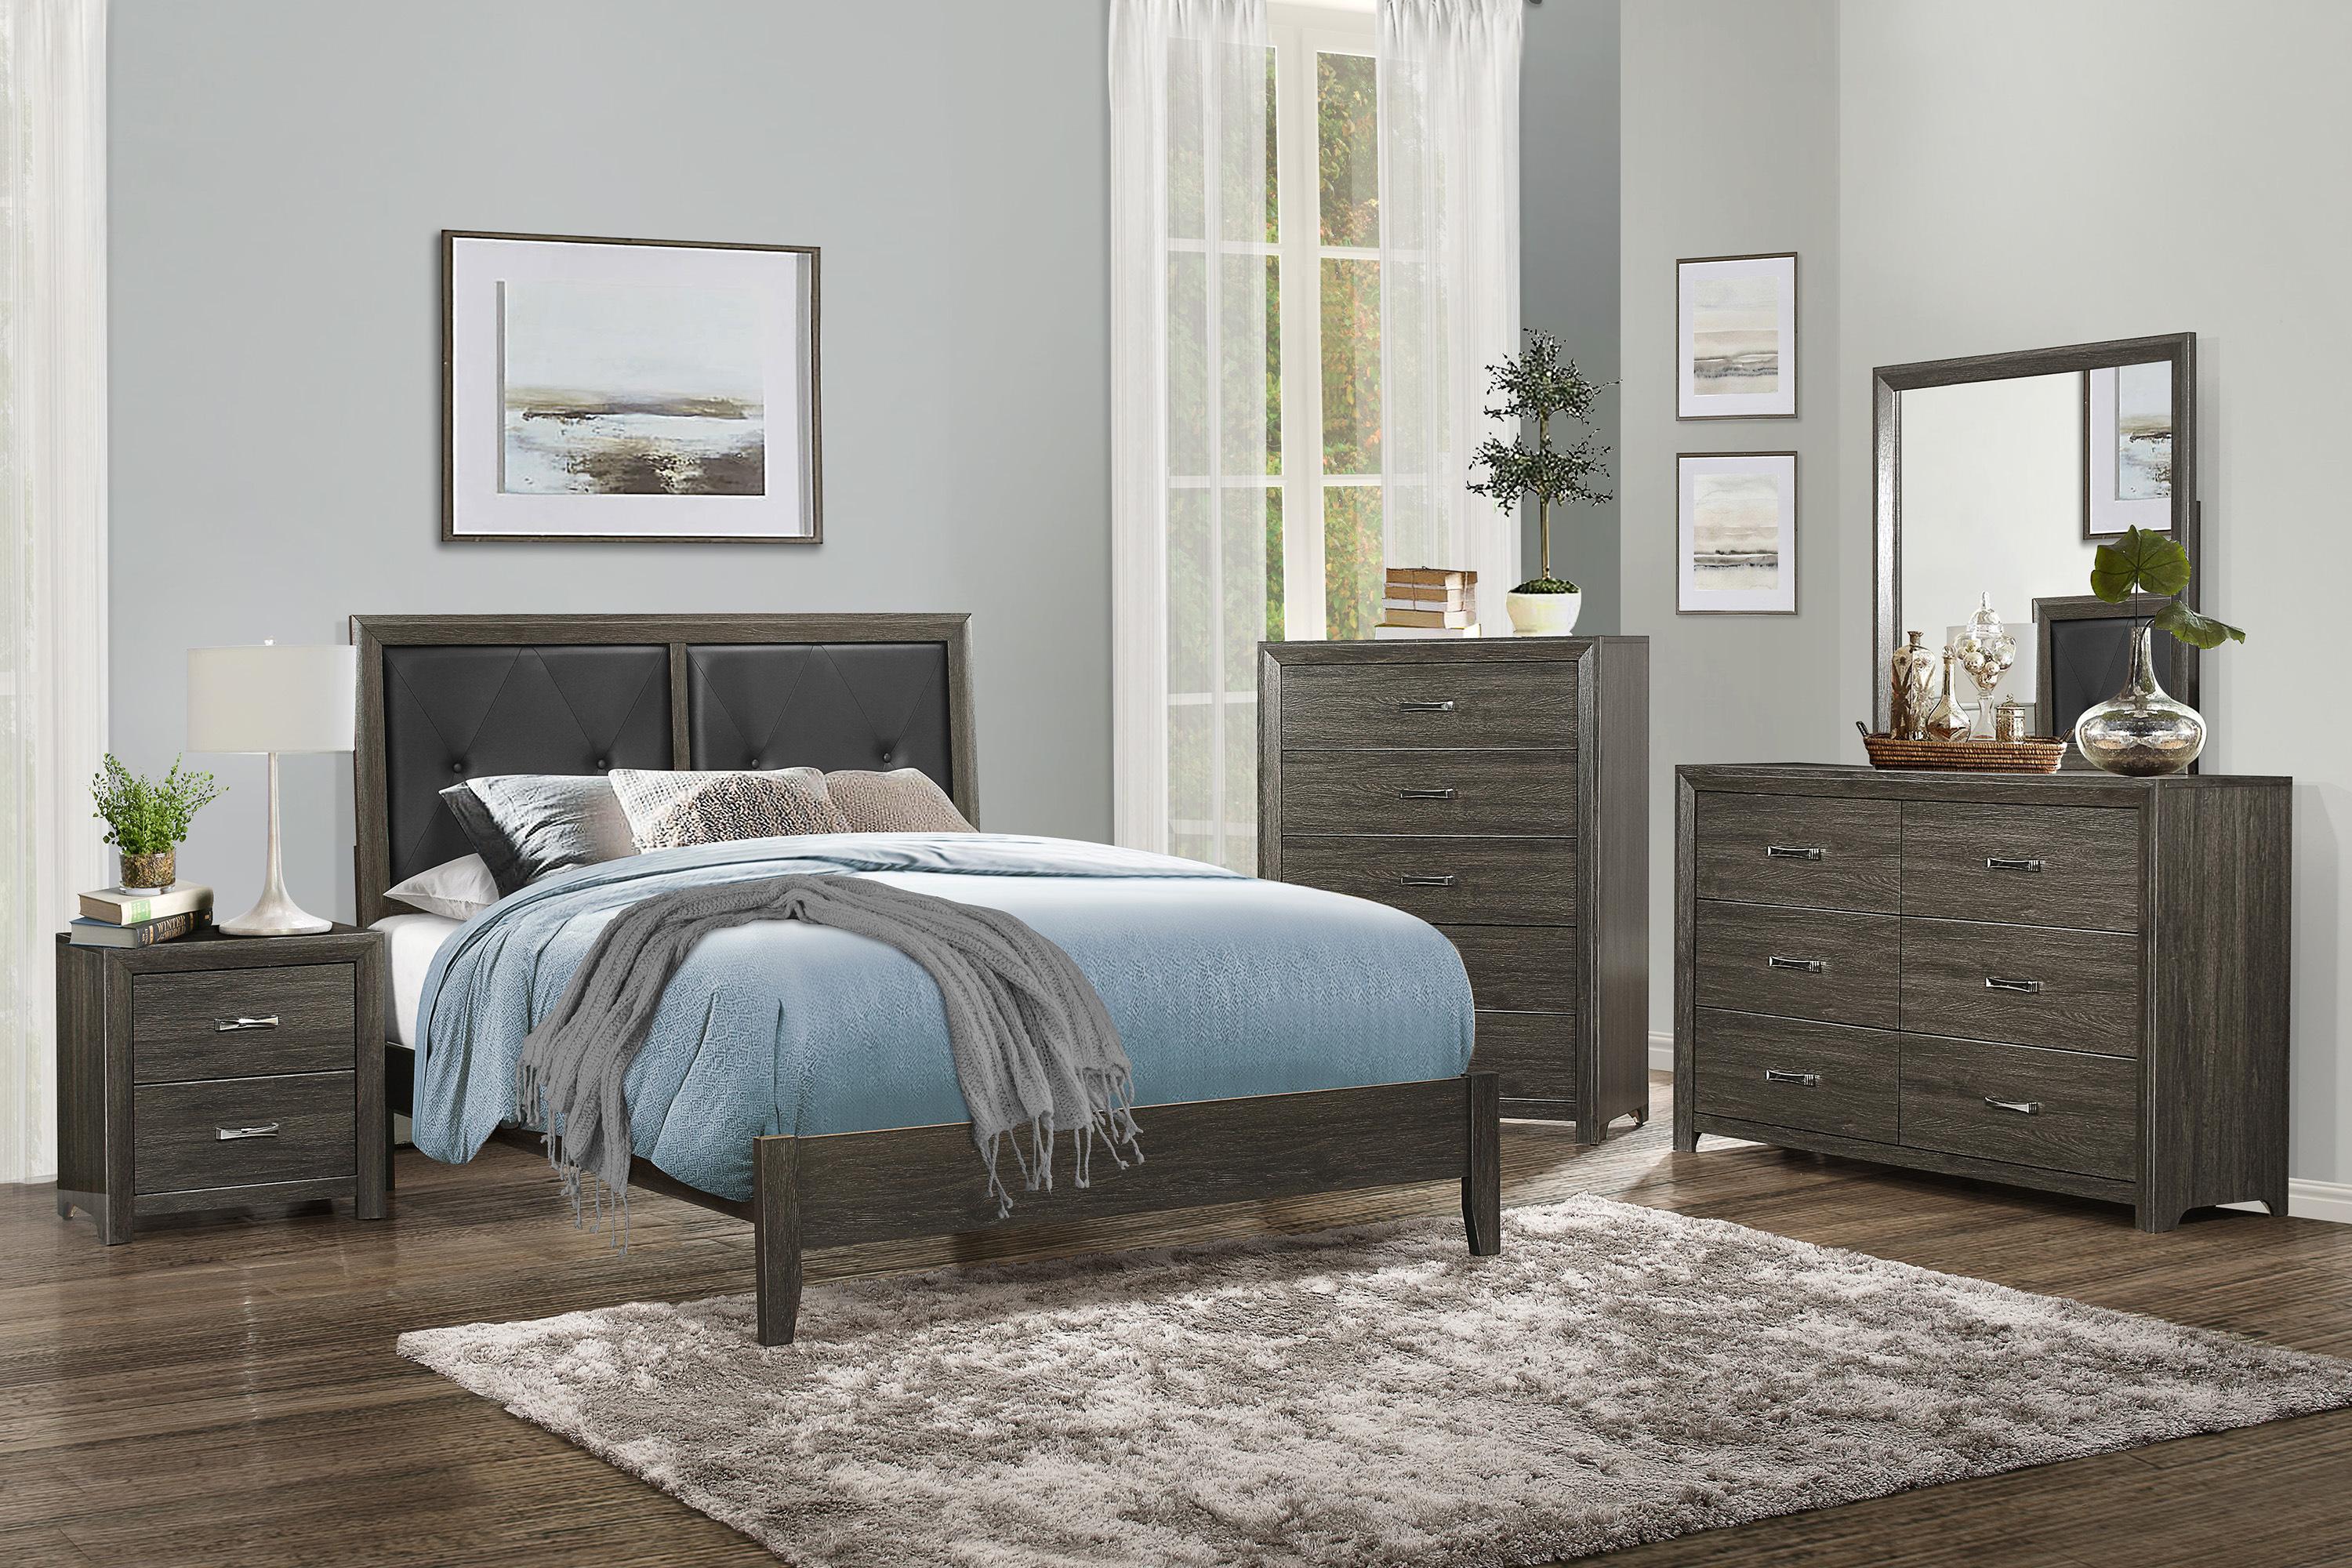 Contemporary Bedroom Set 2145KNP-1CK-6PC Edina 2145KNP-1CK-6PC in Dark Gray Faux Leather